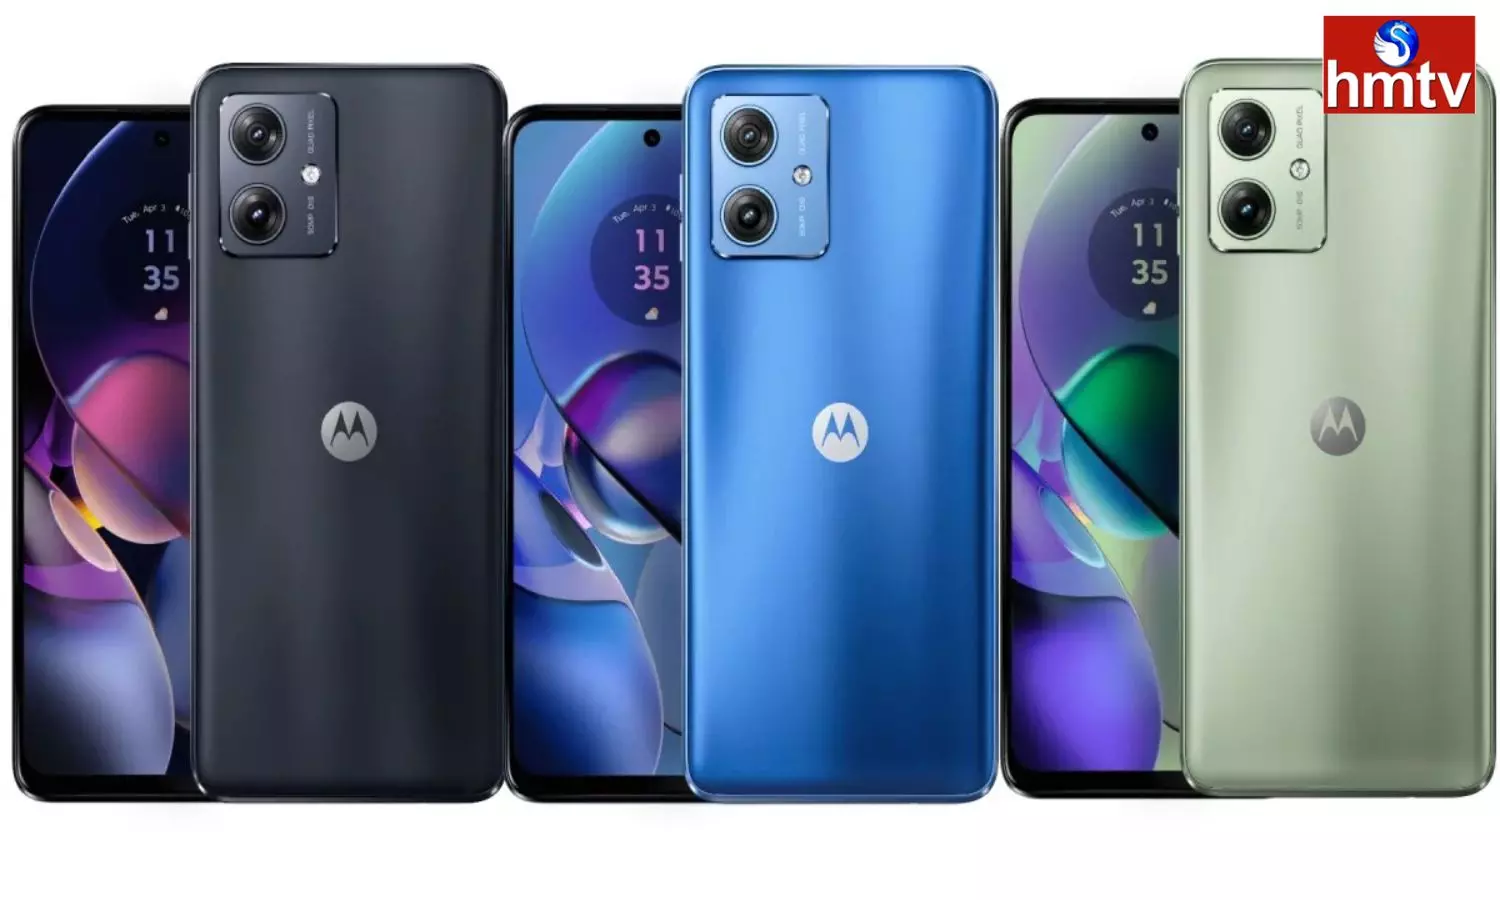 Smartphone maker Motorola will launch the Moto g54 5G smartphone in India today on September 6 Check Price and Features